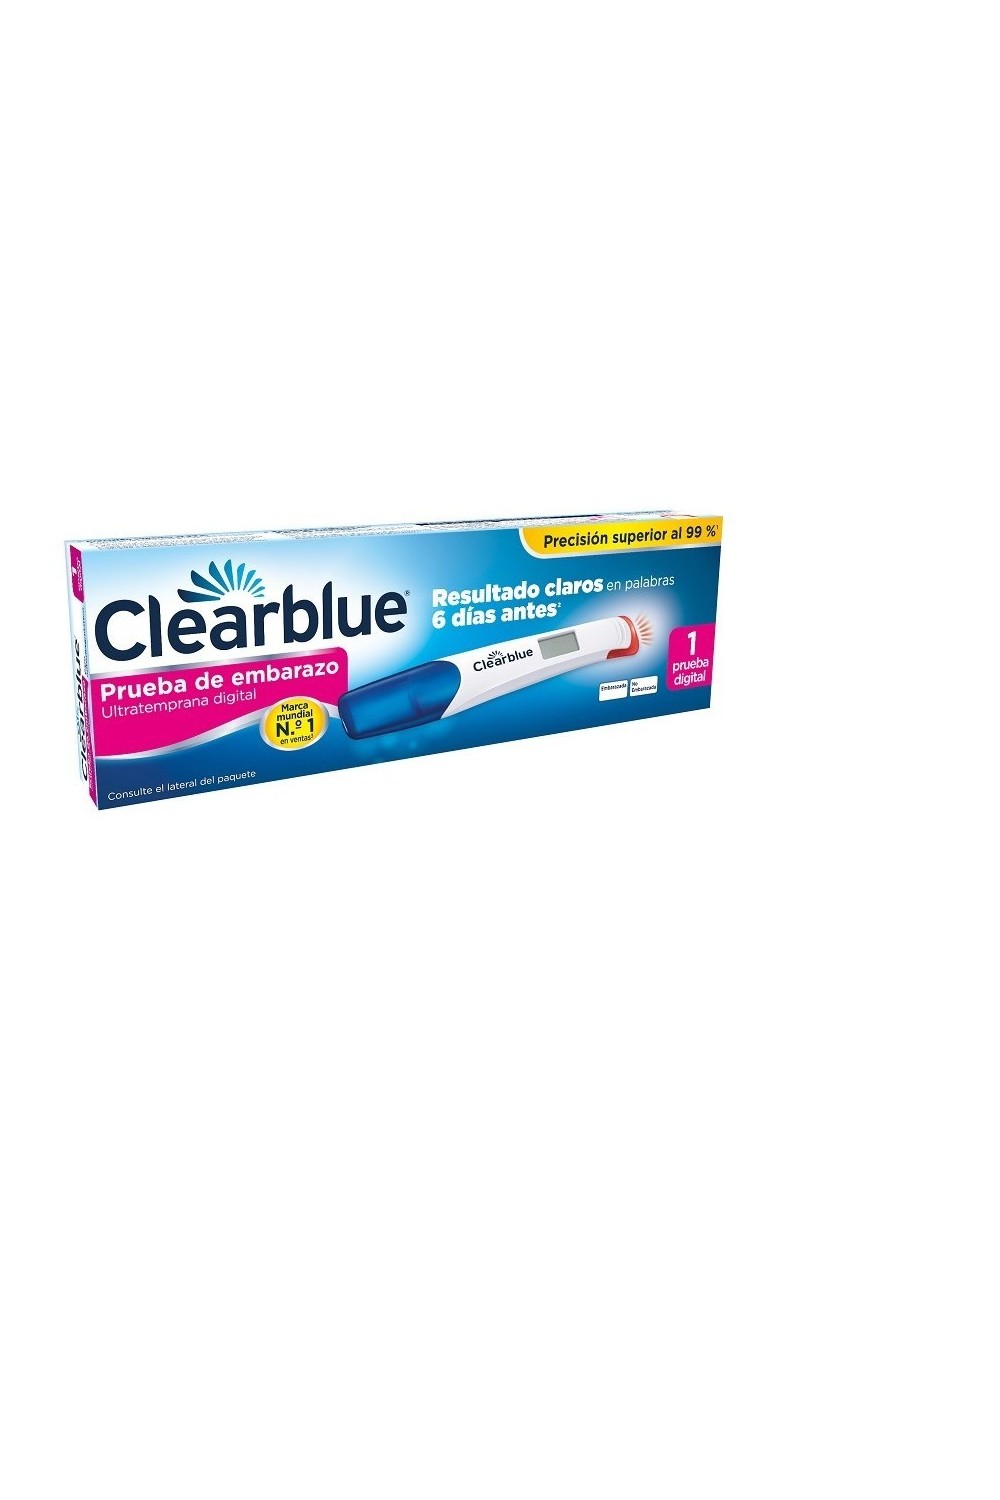 Clearblue Pregnancy Test Early Detection Clear Results 1 Unit